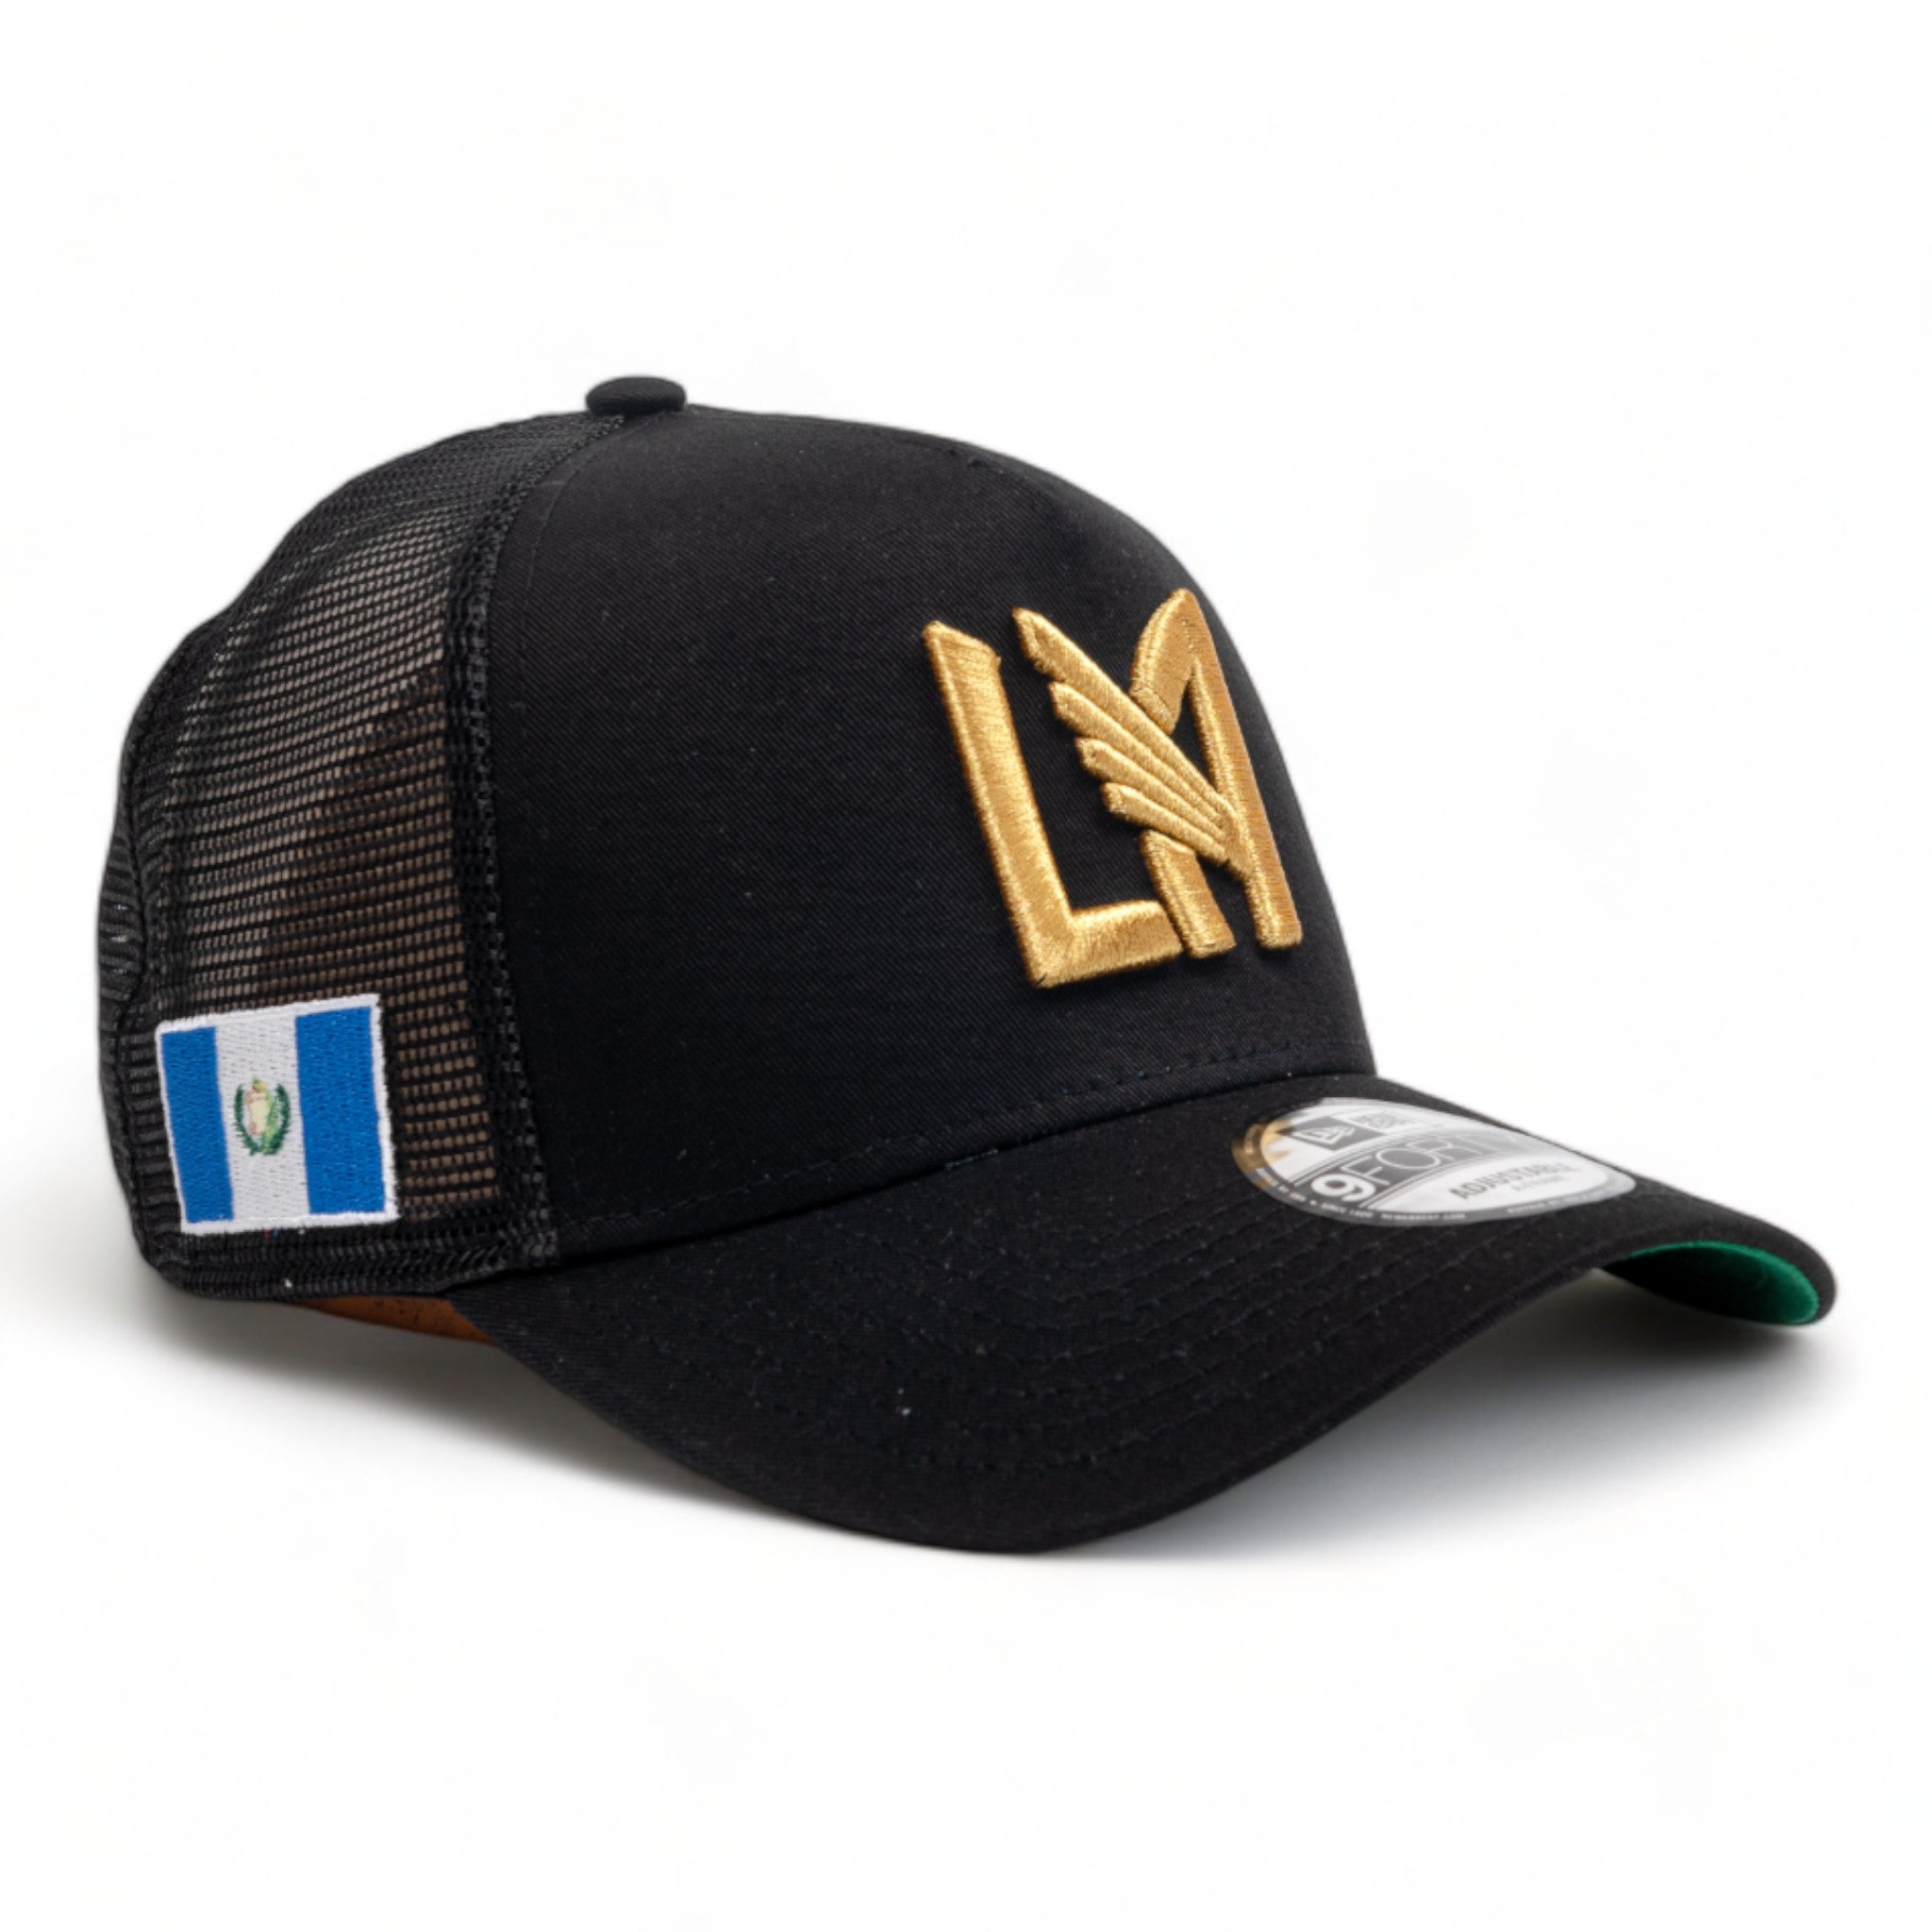 The Magnolia Park x New Era 9Forty A-Frame Trucker LAFC Heritage Collection (Guatemala Flag) (Black/Gold)